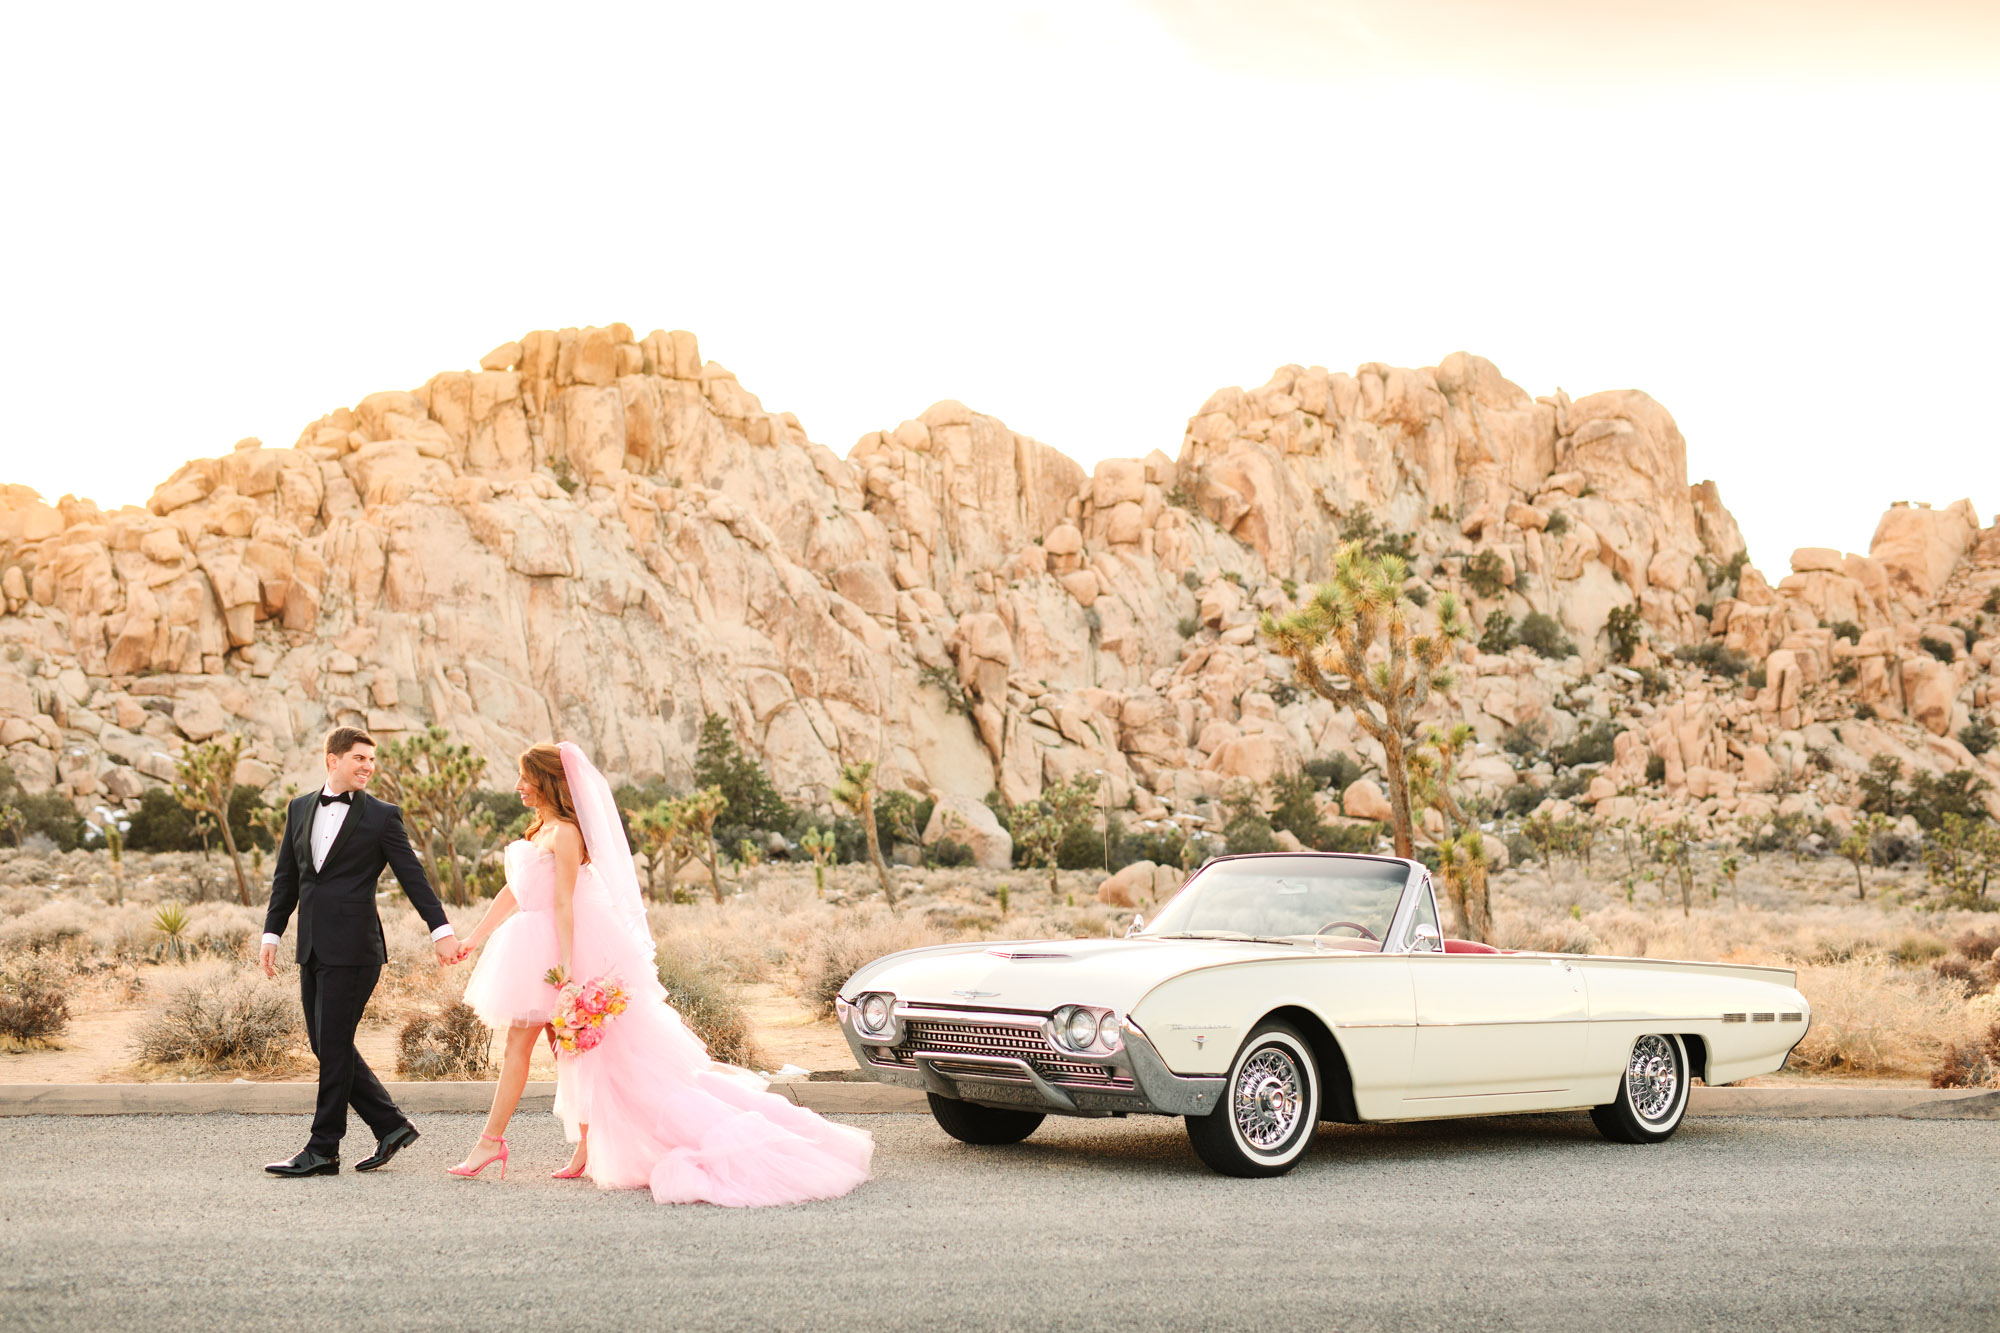 Bride and groom walking with white classic convertible | Pink wedding dress Joshua Tree elopement featured on Green Wedding Shoes | Colorful desert wedding inspiration for fun-loving couples in Southern California #joshuatreewedding #joshuatreeelopement #pinkwedding #greenweddingshoes Source: Mary Costa Photography | Los Angeles